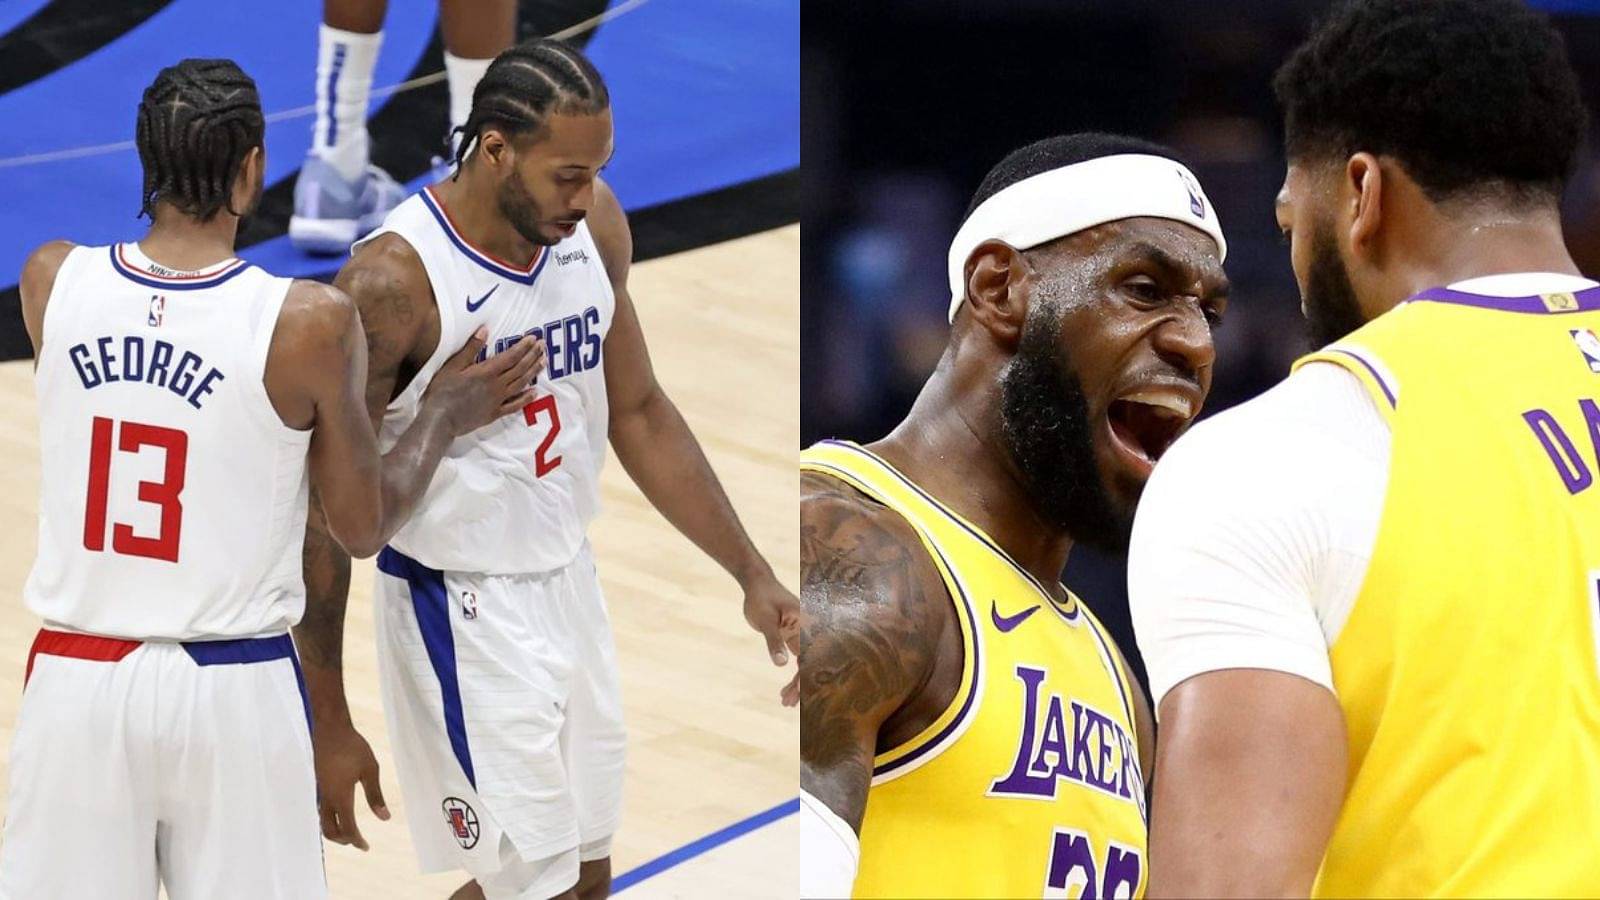 “Kawhi Leonard and LeBron James can be the best 1v1 defender, but they decide not to”: NBA Reddit claims superstars playing defense is over-valued